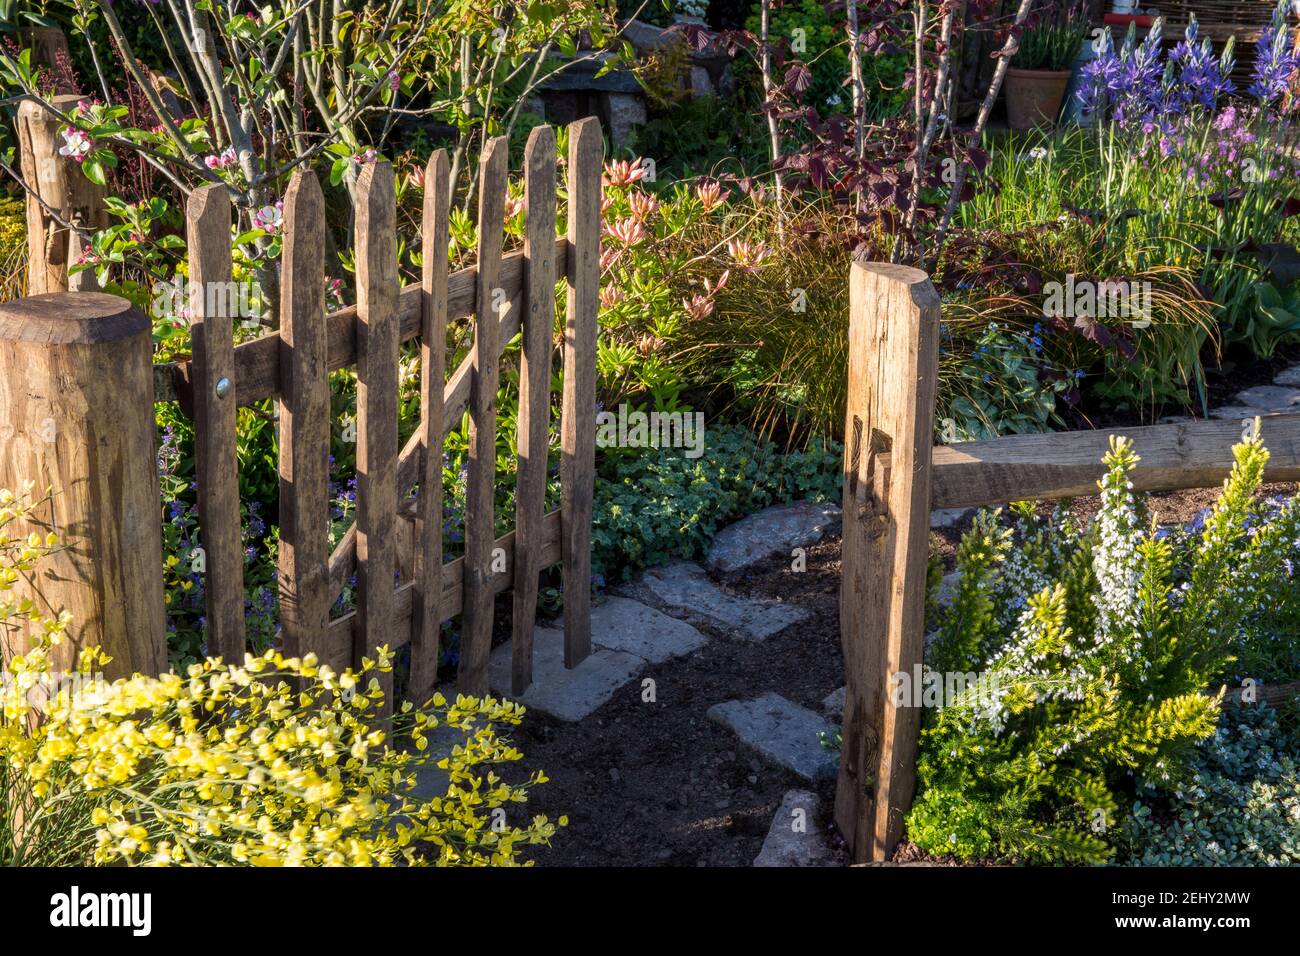 A rustic post and rail wooden fence posts with wooden picket garden fence gate in cottage garden mixed planting of Cytisus scoparius - Commom broom UK Stock Photo